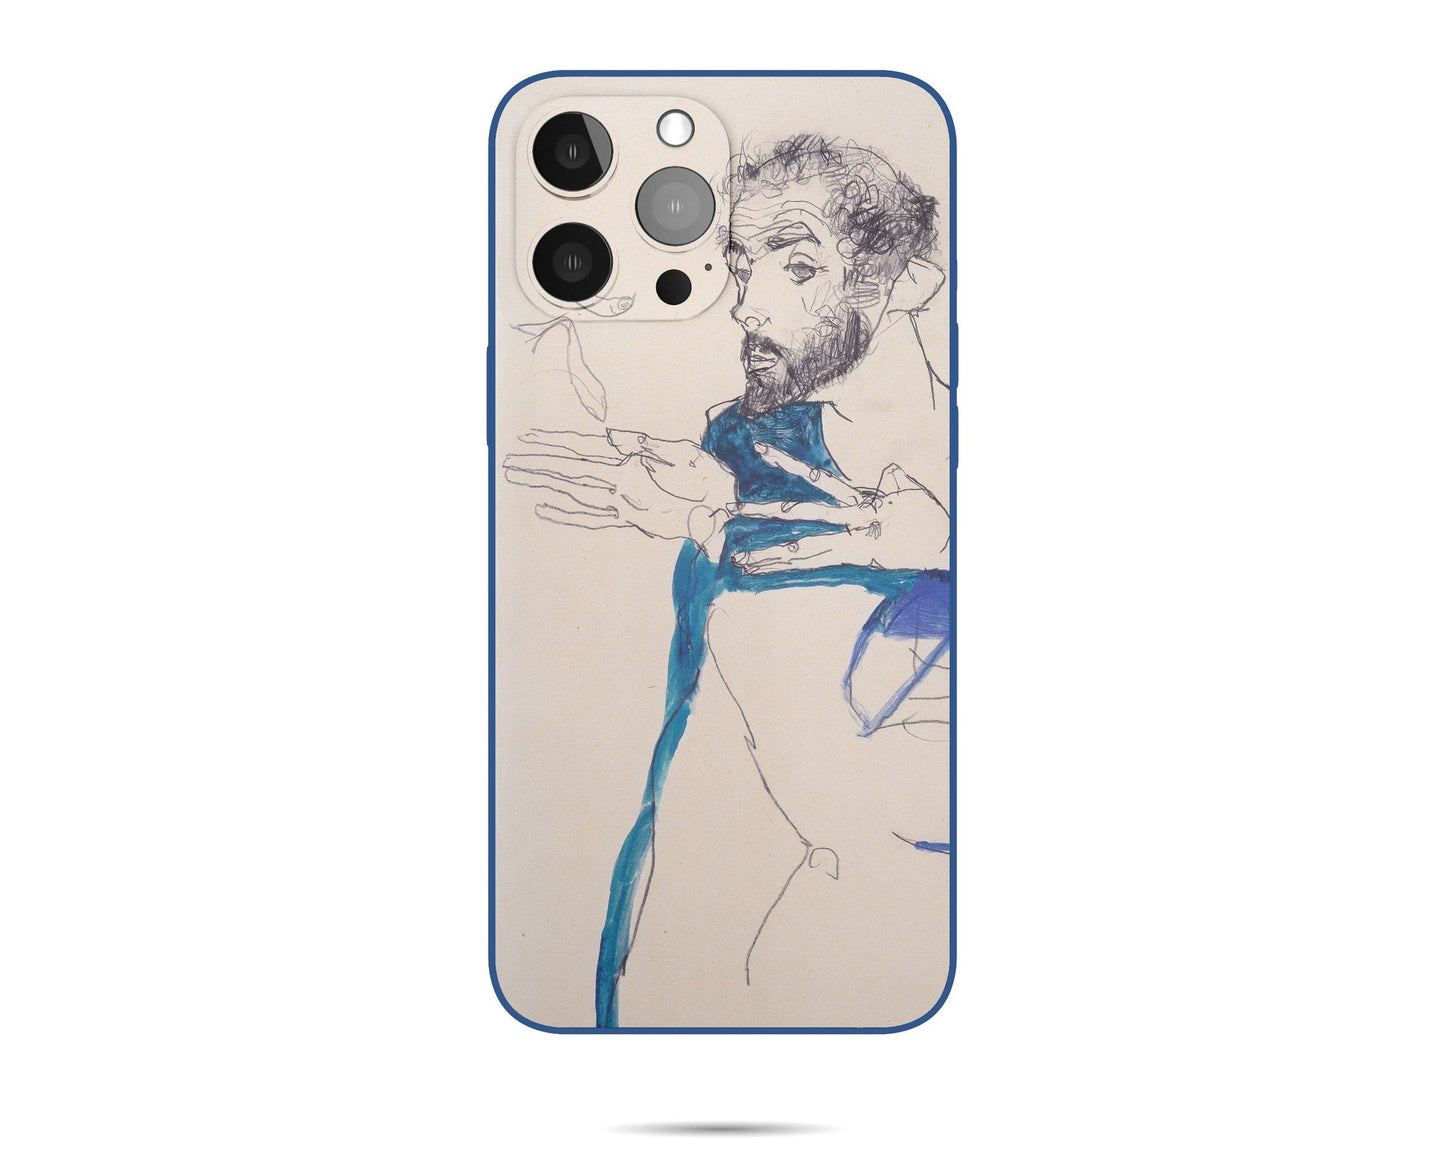 Iphone 14 Case Of Egon Schiele Famous Painting, Iphone 11 Pro Max, Iphone Xs Case, Designer Iphone 8 Plus Case, Gift For Her, Silicone Case